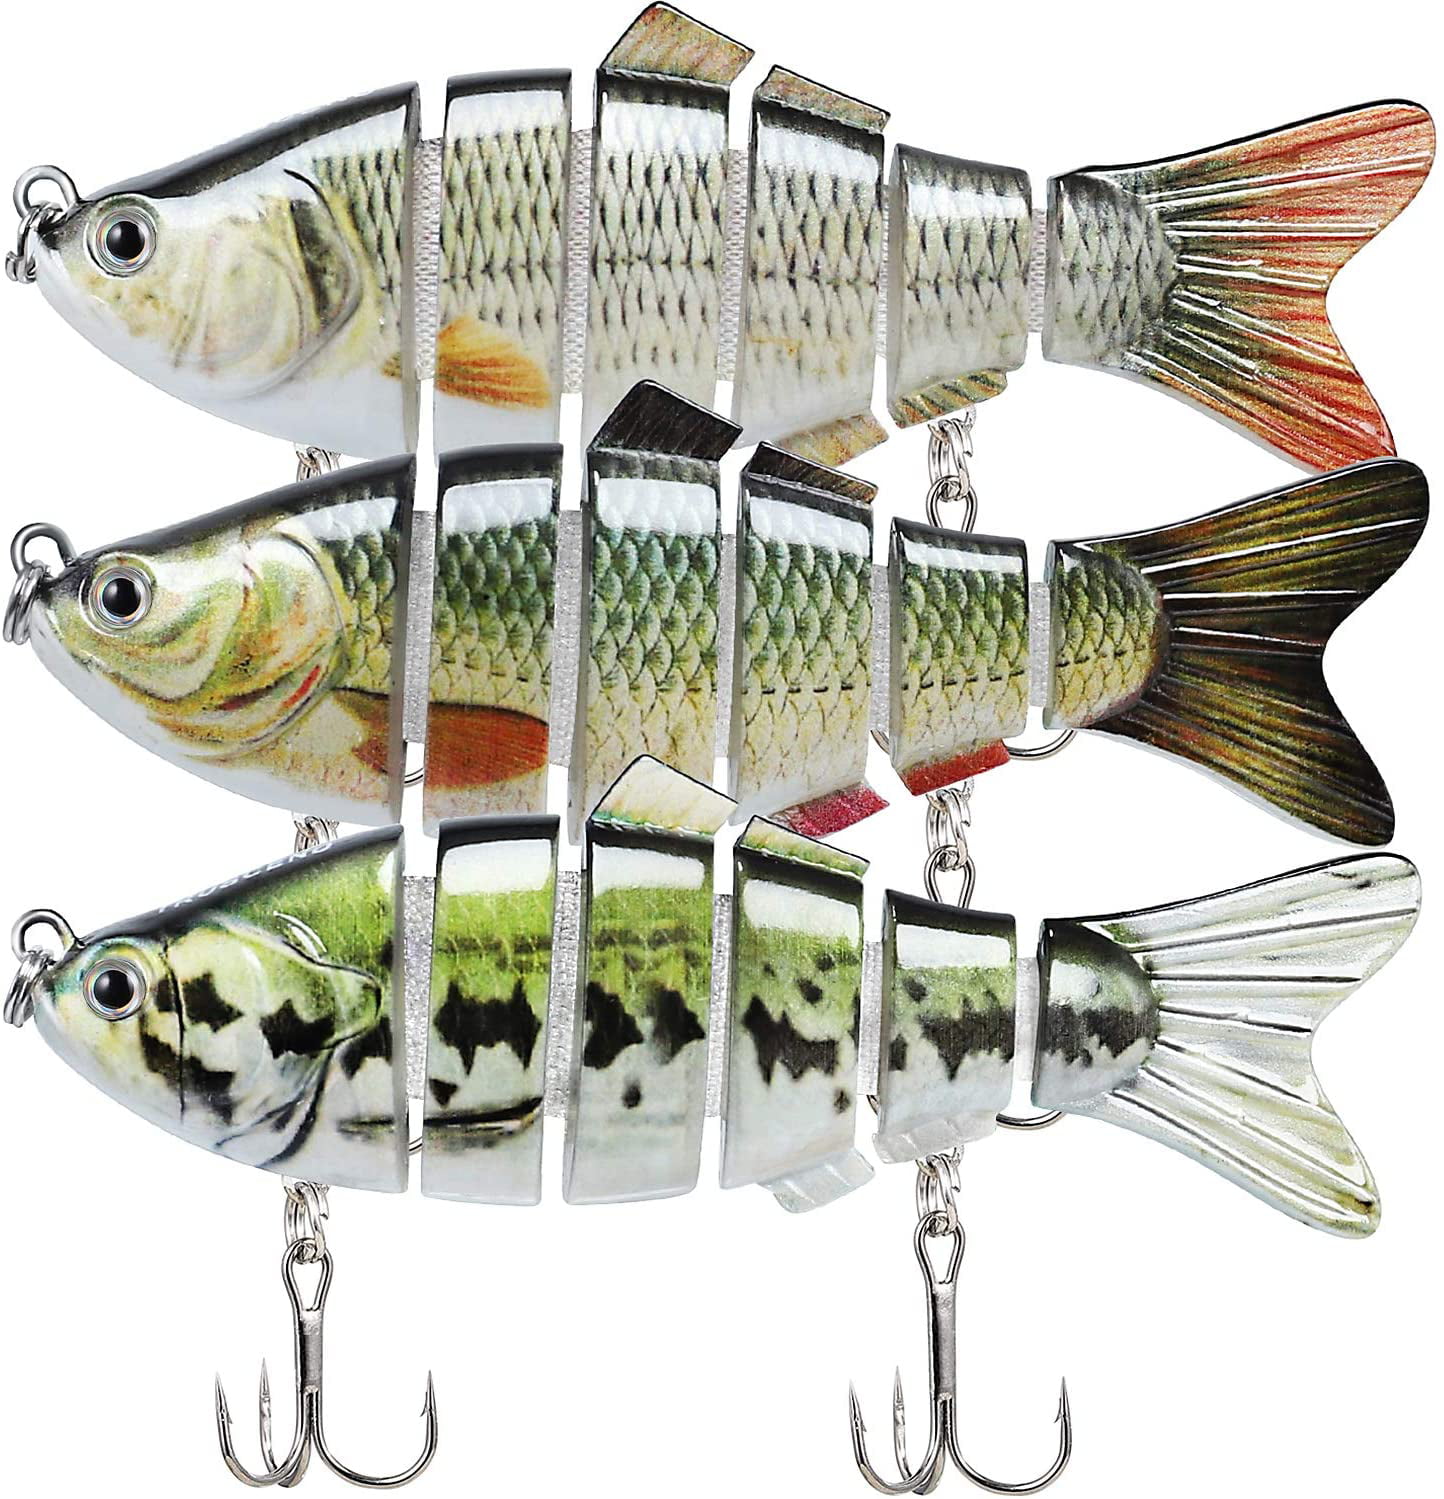 8 Sections Jointed segmented swimbait rattling bb fishing lure bait 